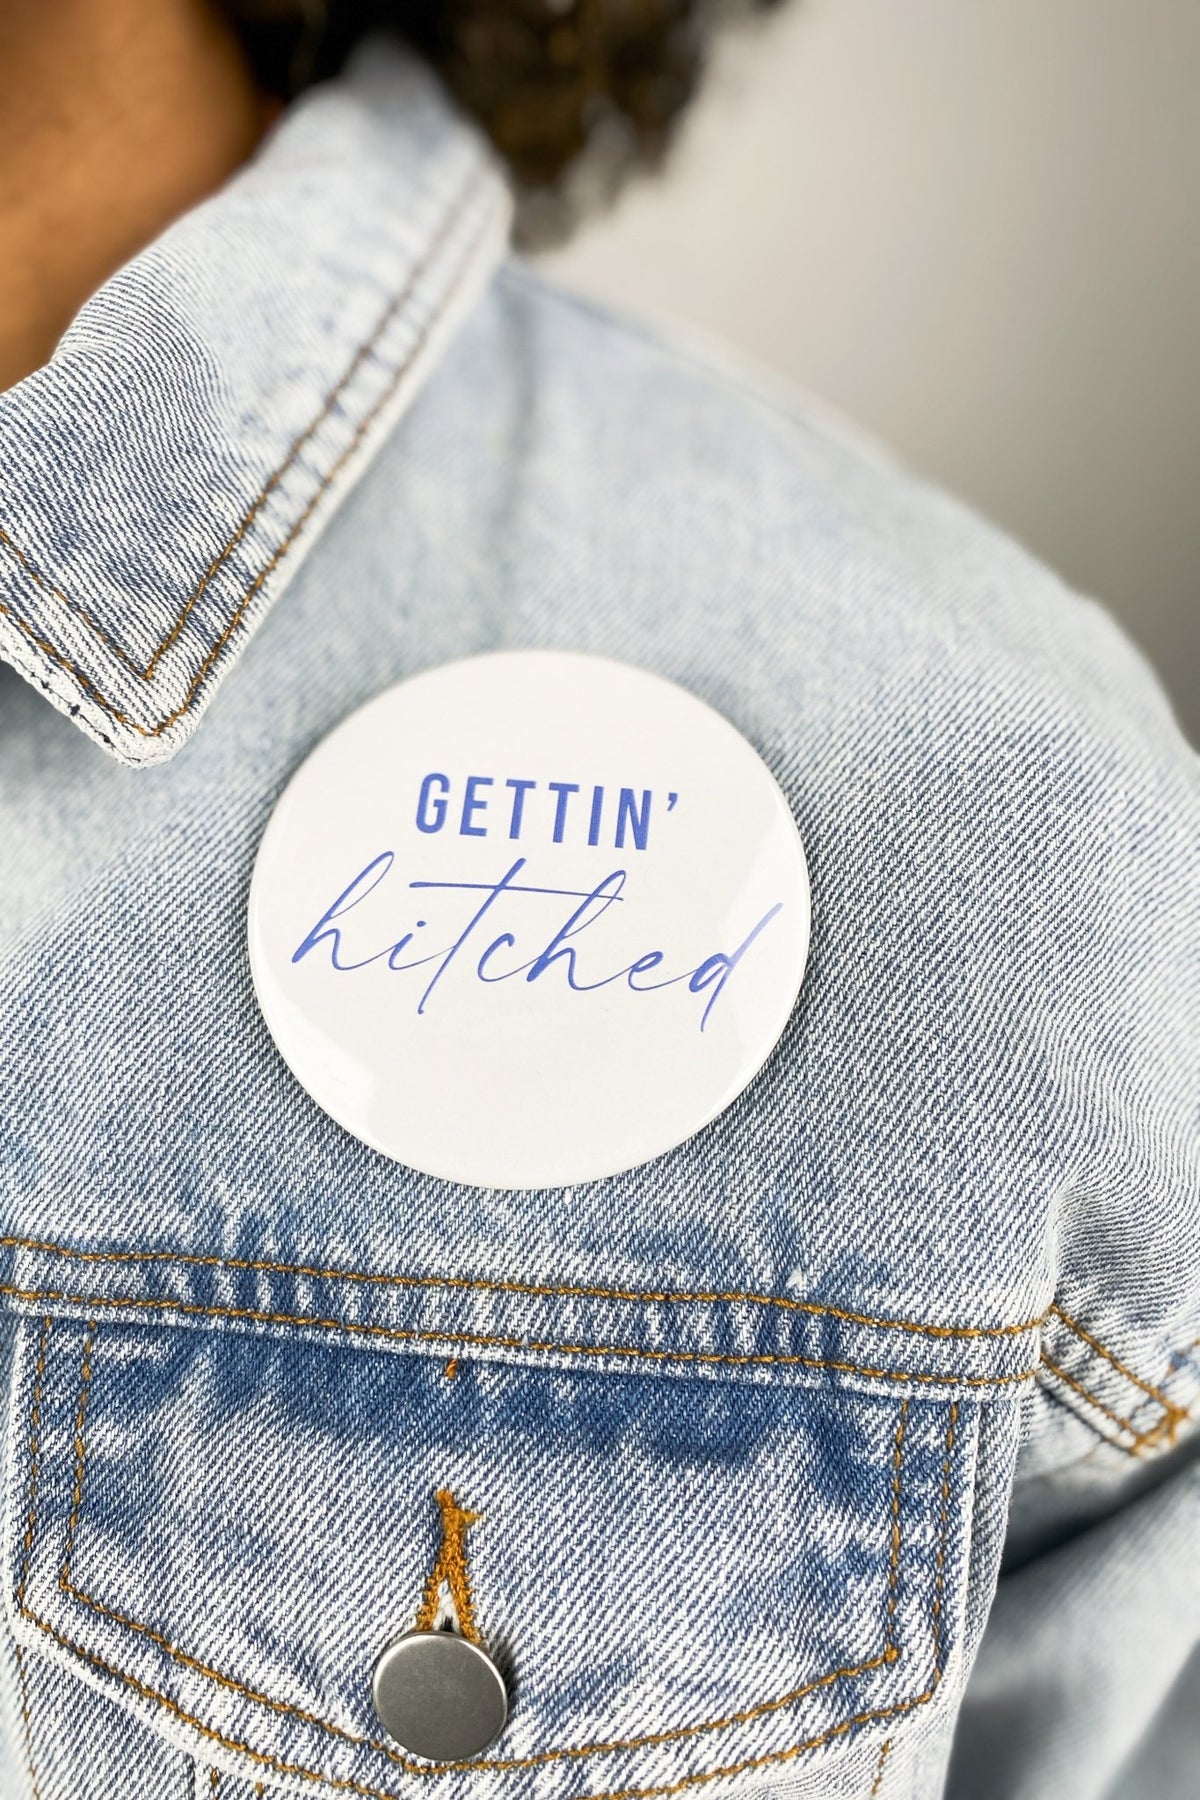 Gettin' hitched 3 inch button - Stylish button -  Cute Bridal Collection at Lush Fashion Lounge Boutique in Oklahoma City